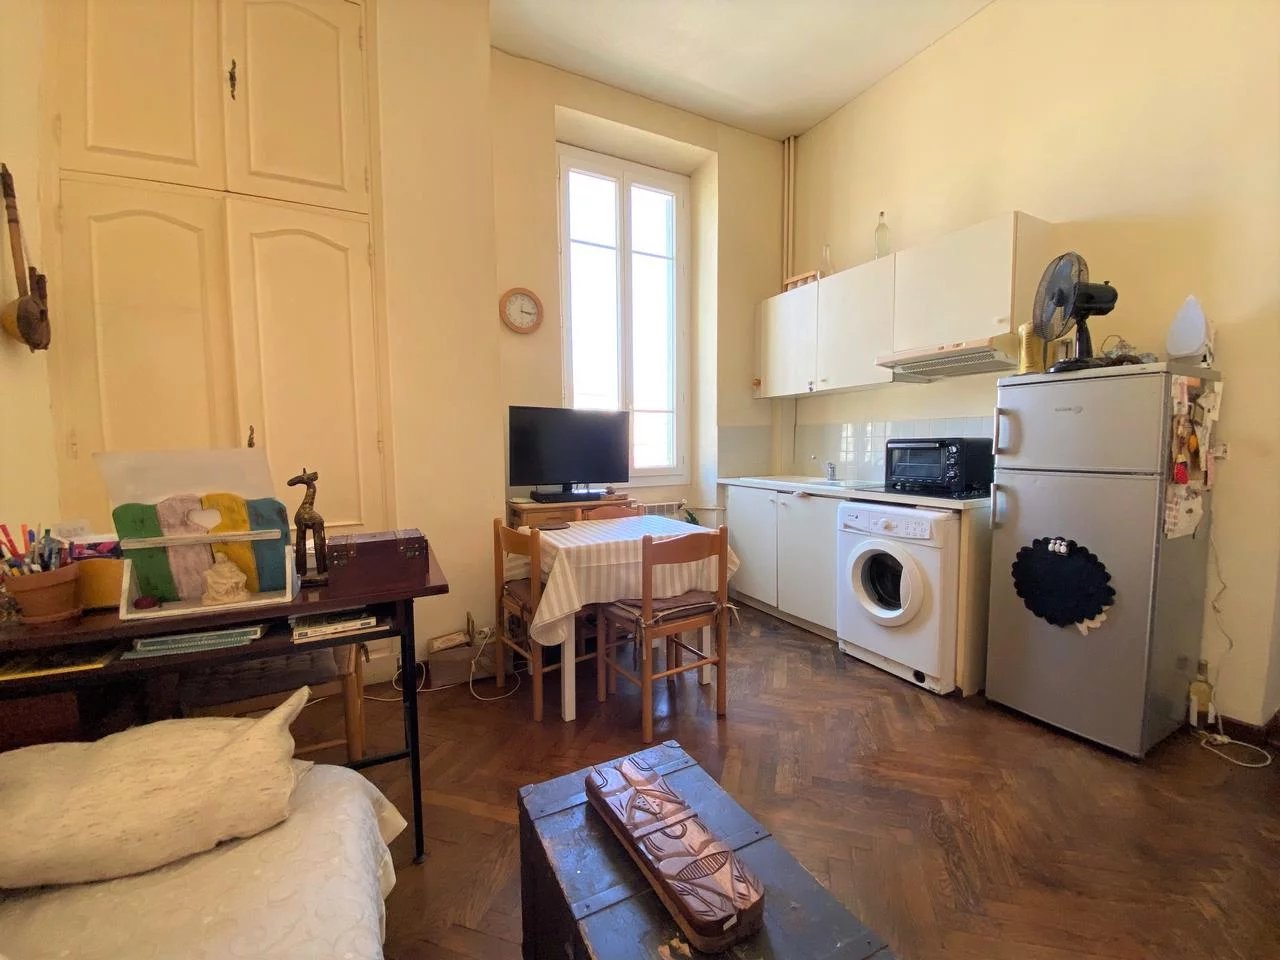 Appartement  2 Rooms 30m2  for sale   279 000 €